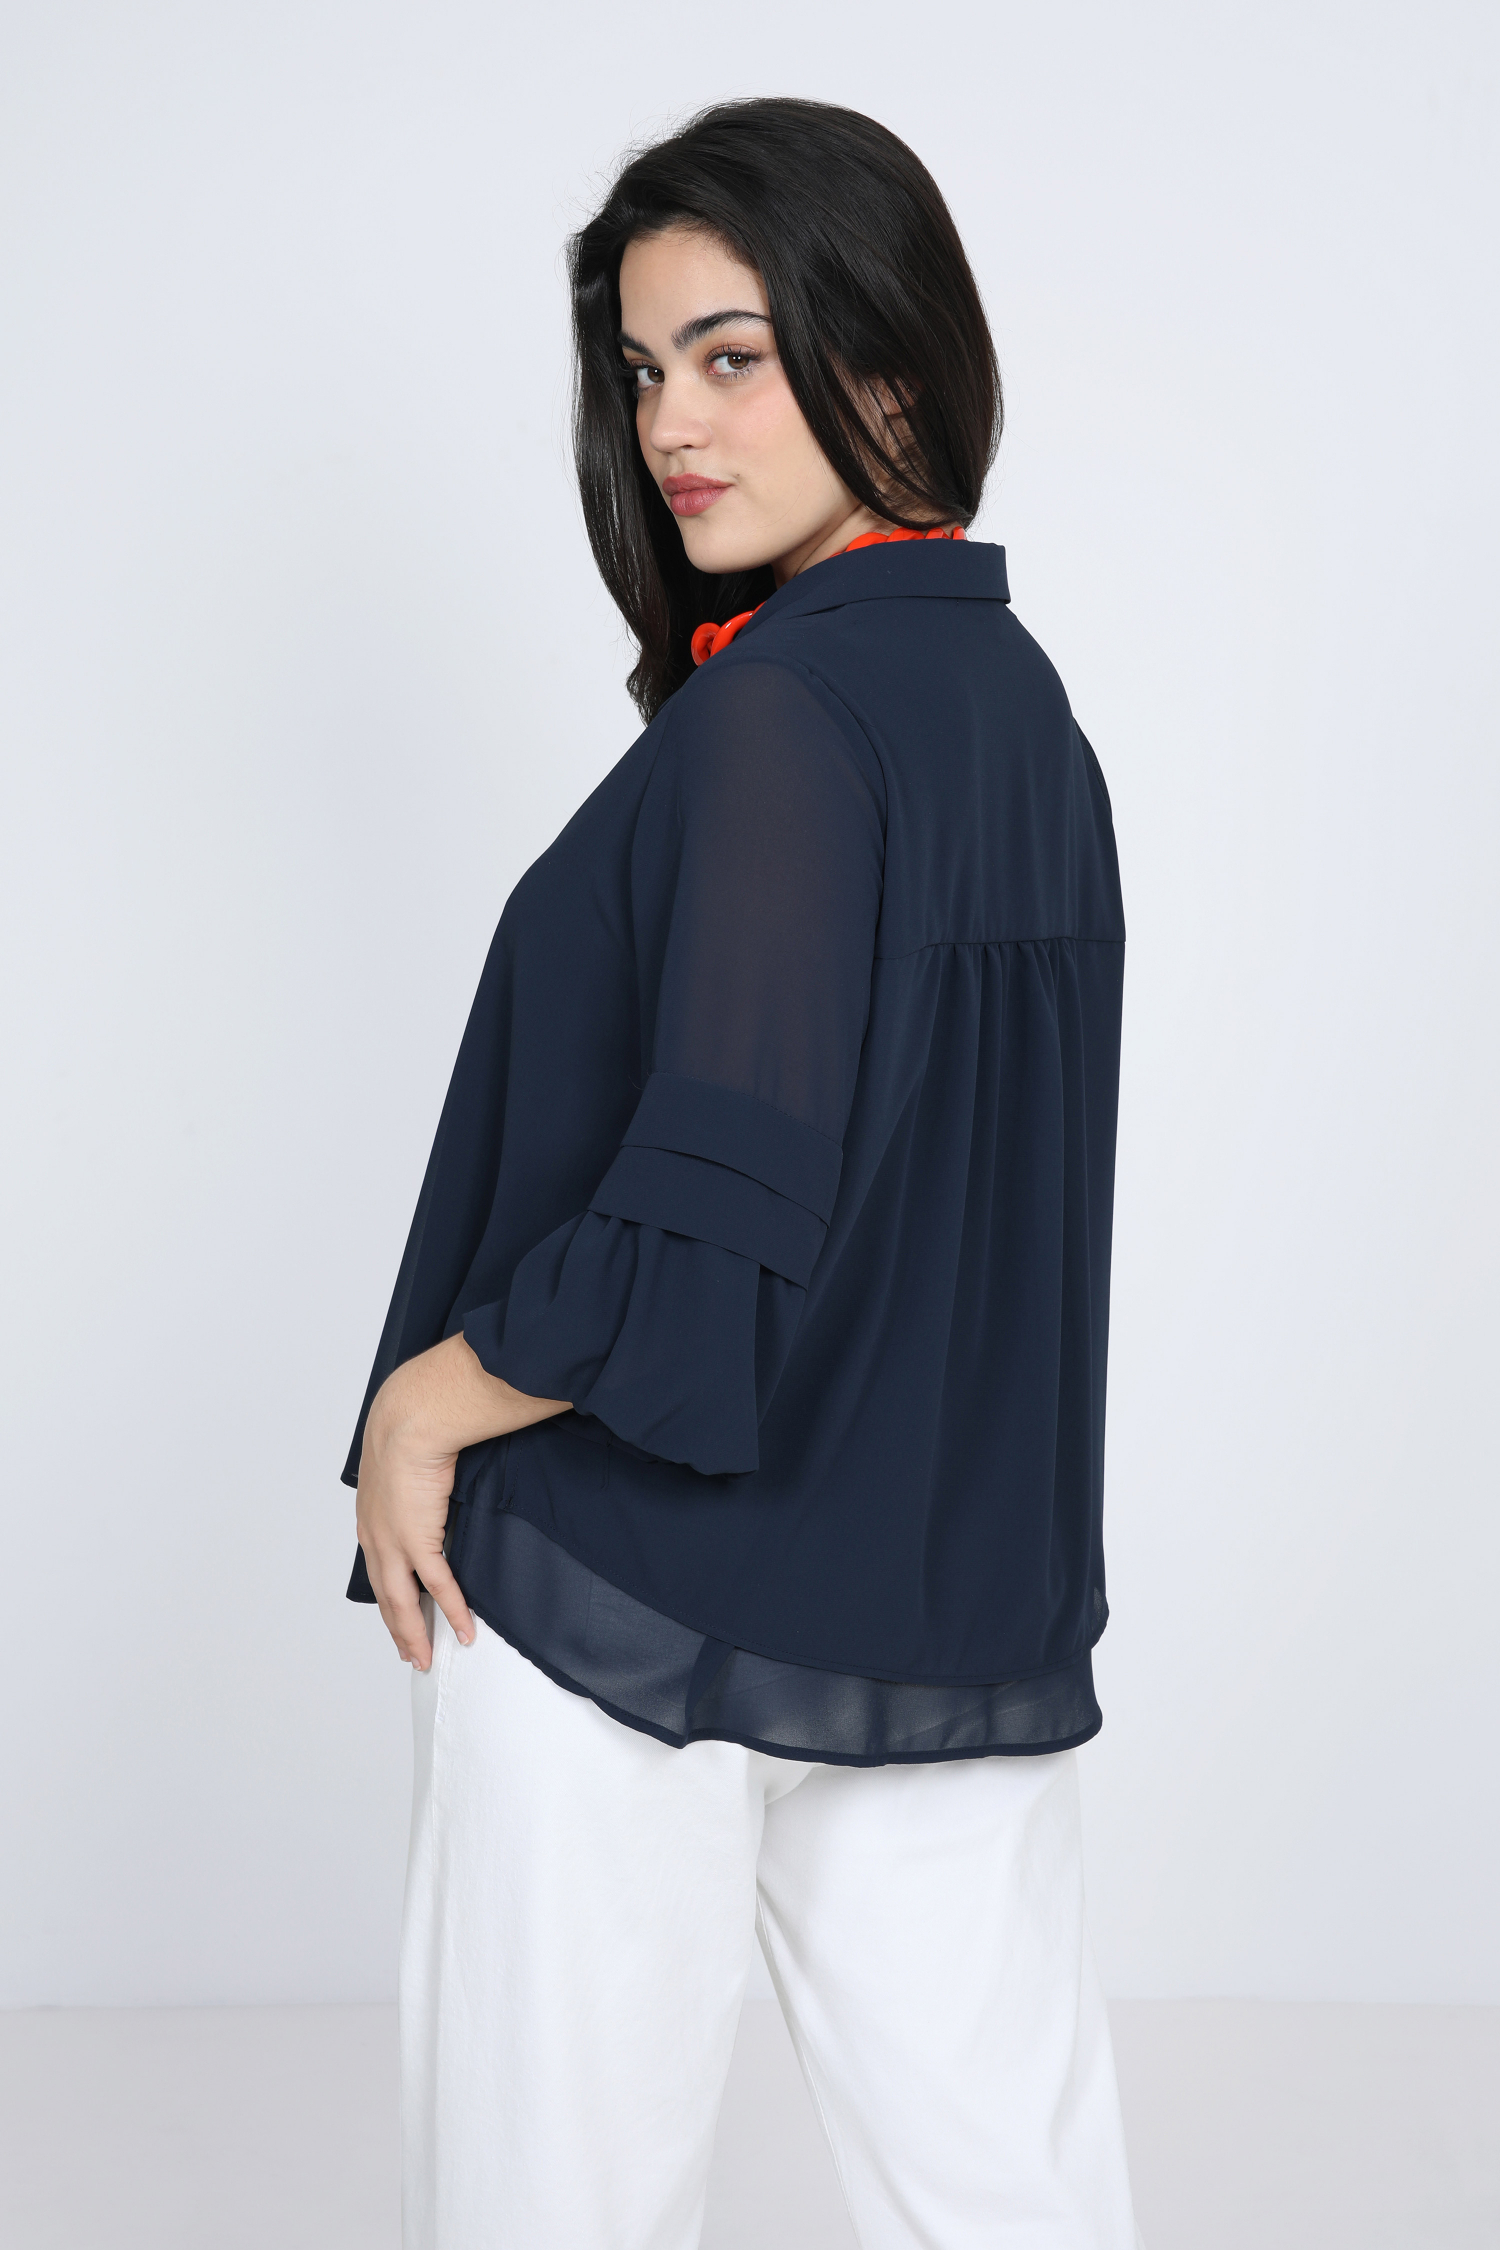 Double blouse in plain veil (shipping 25/28 February)